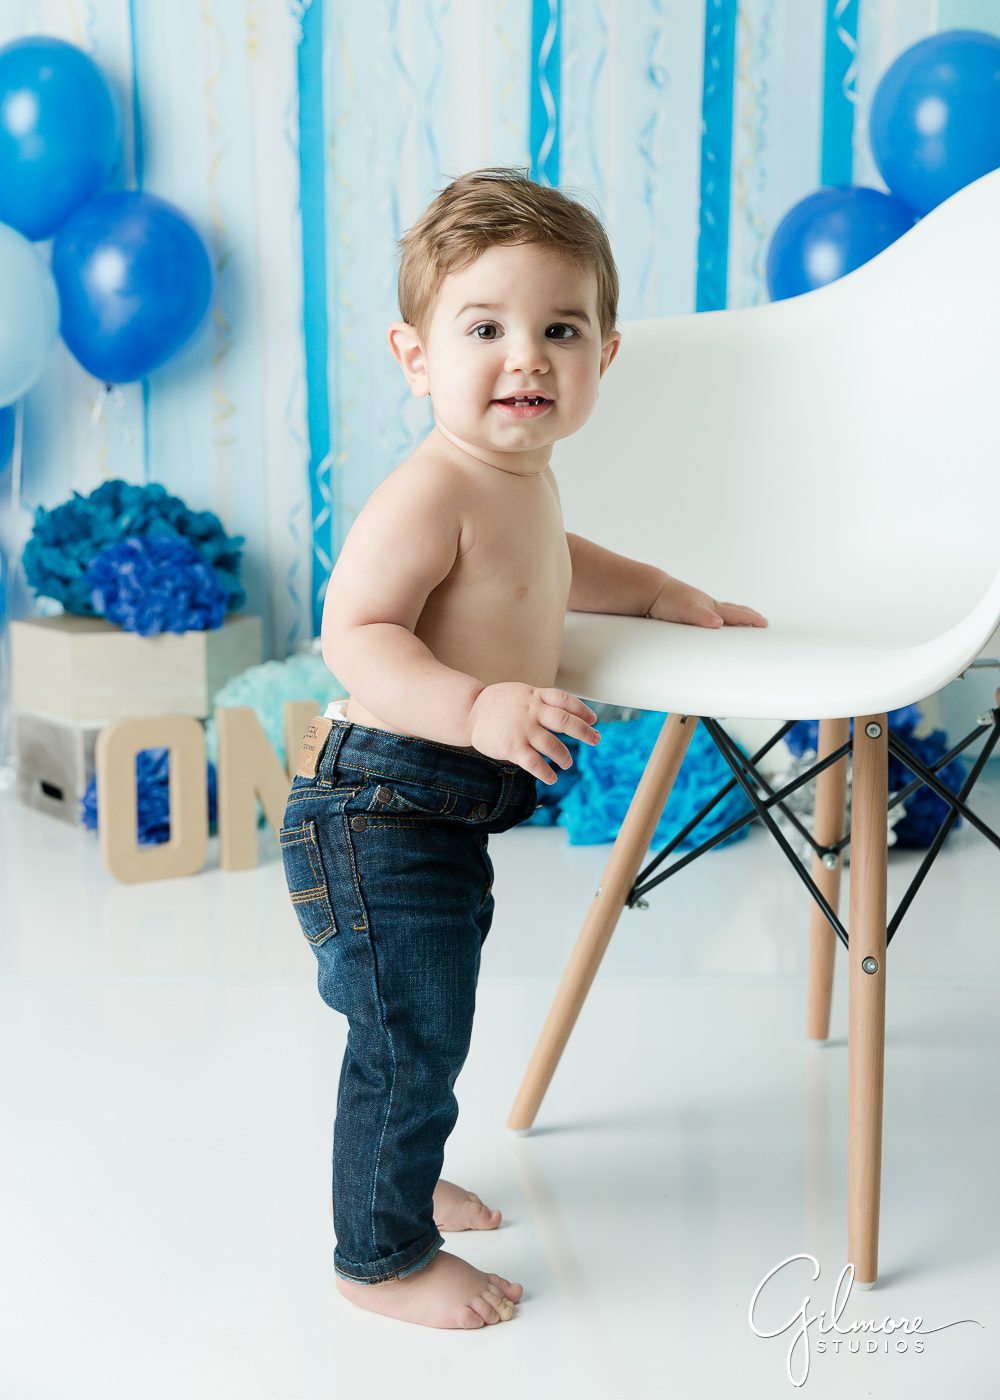 Cake Smash photography for boys, classic portrait session, photography, birthdays, boys outfit